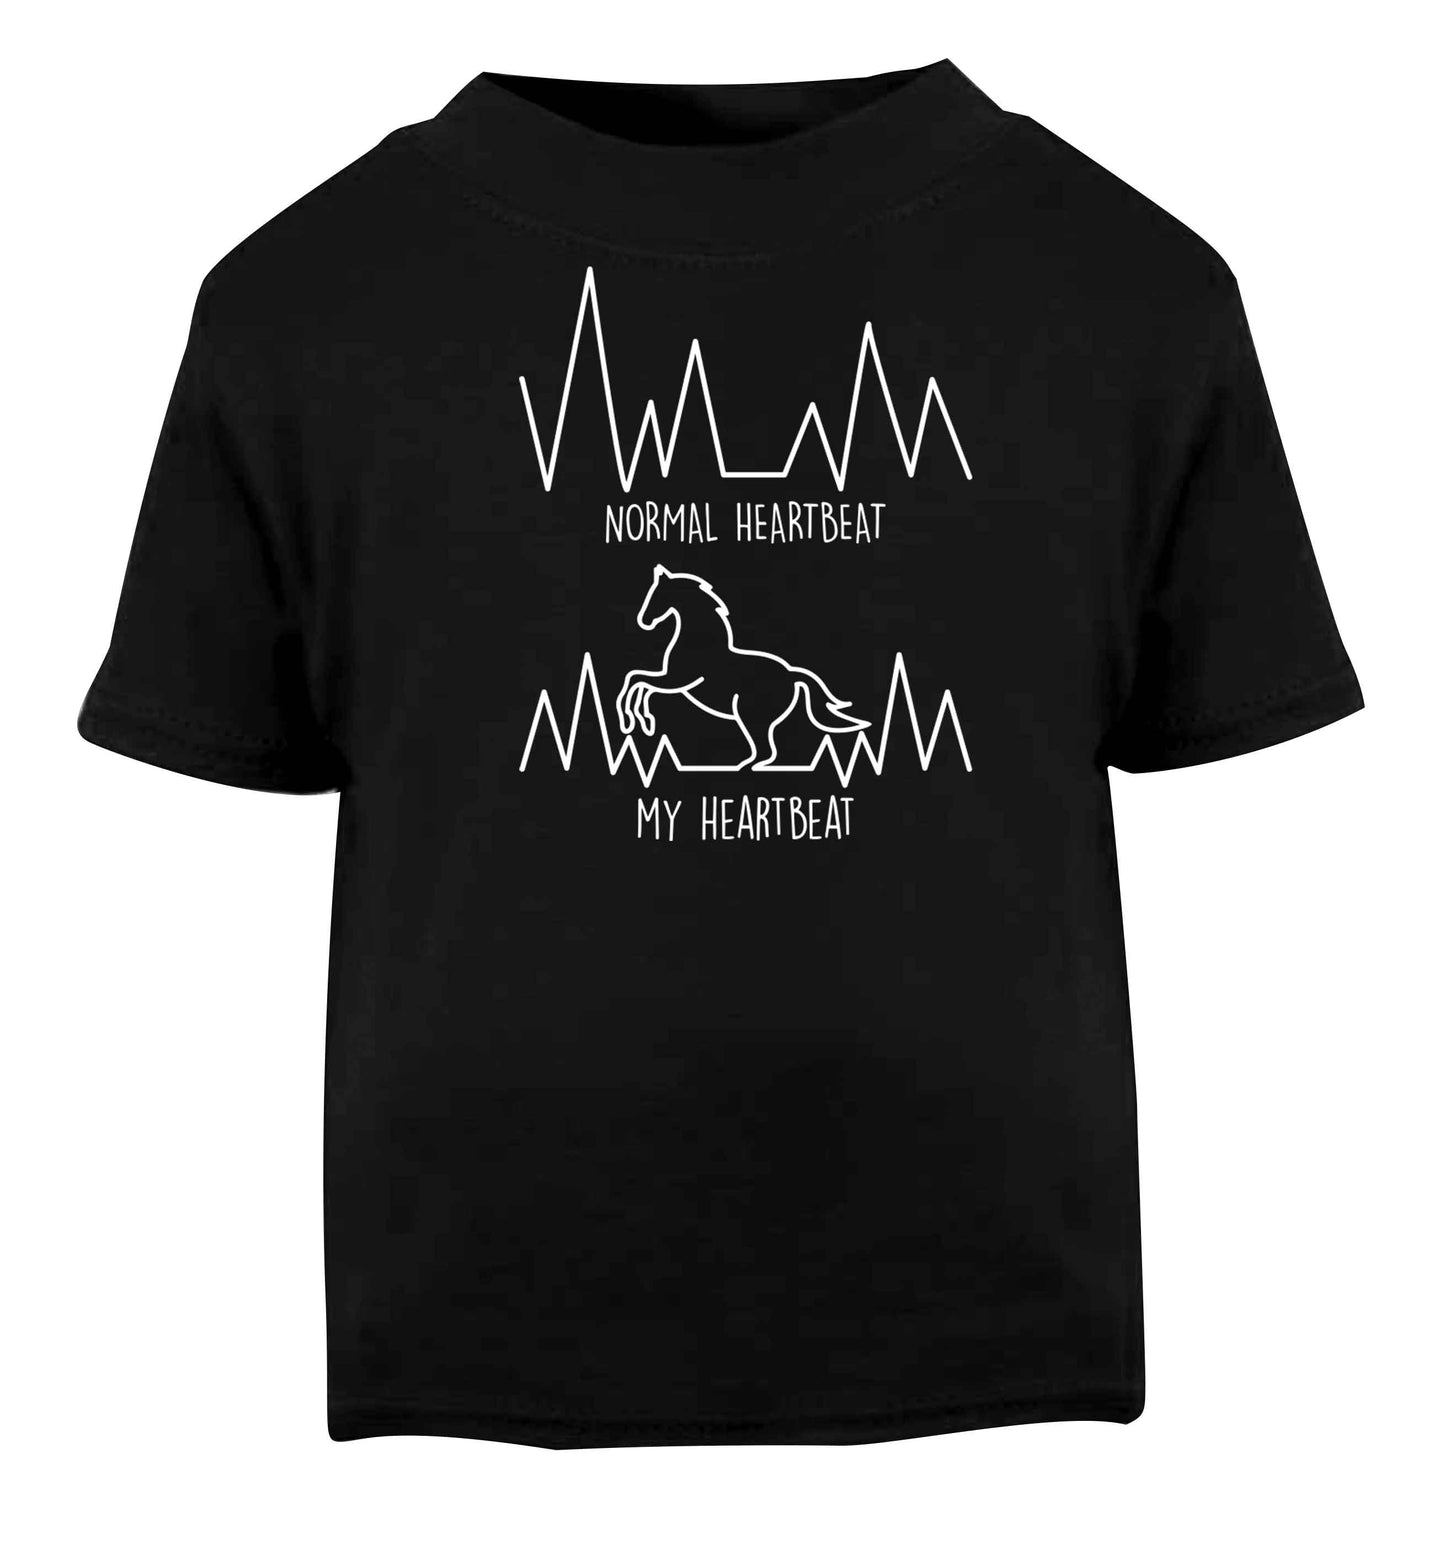 Horse - Normal heartbeat my heartbeat Black baby toddler Tshirt 2 years